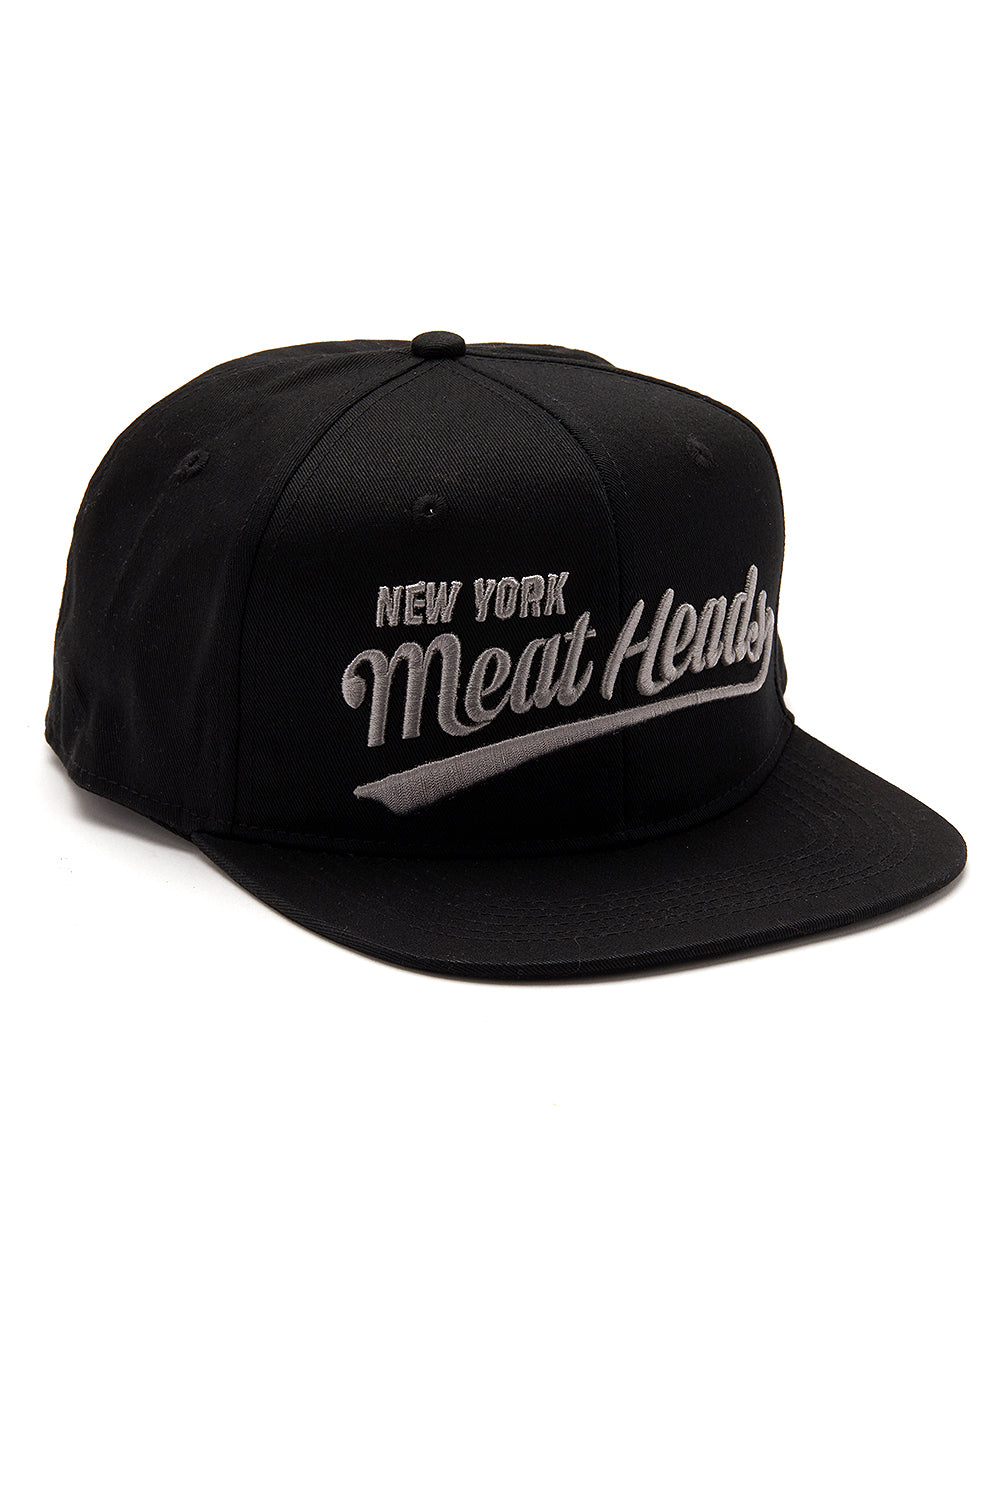 New York Meatheads Team Snap Back Hat (Limited Edition) - Slick It Up 